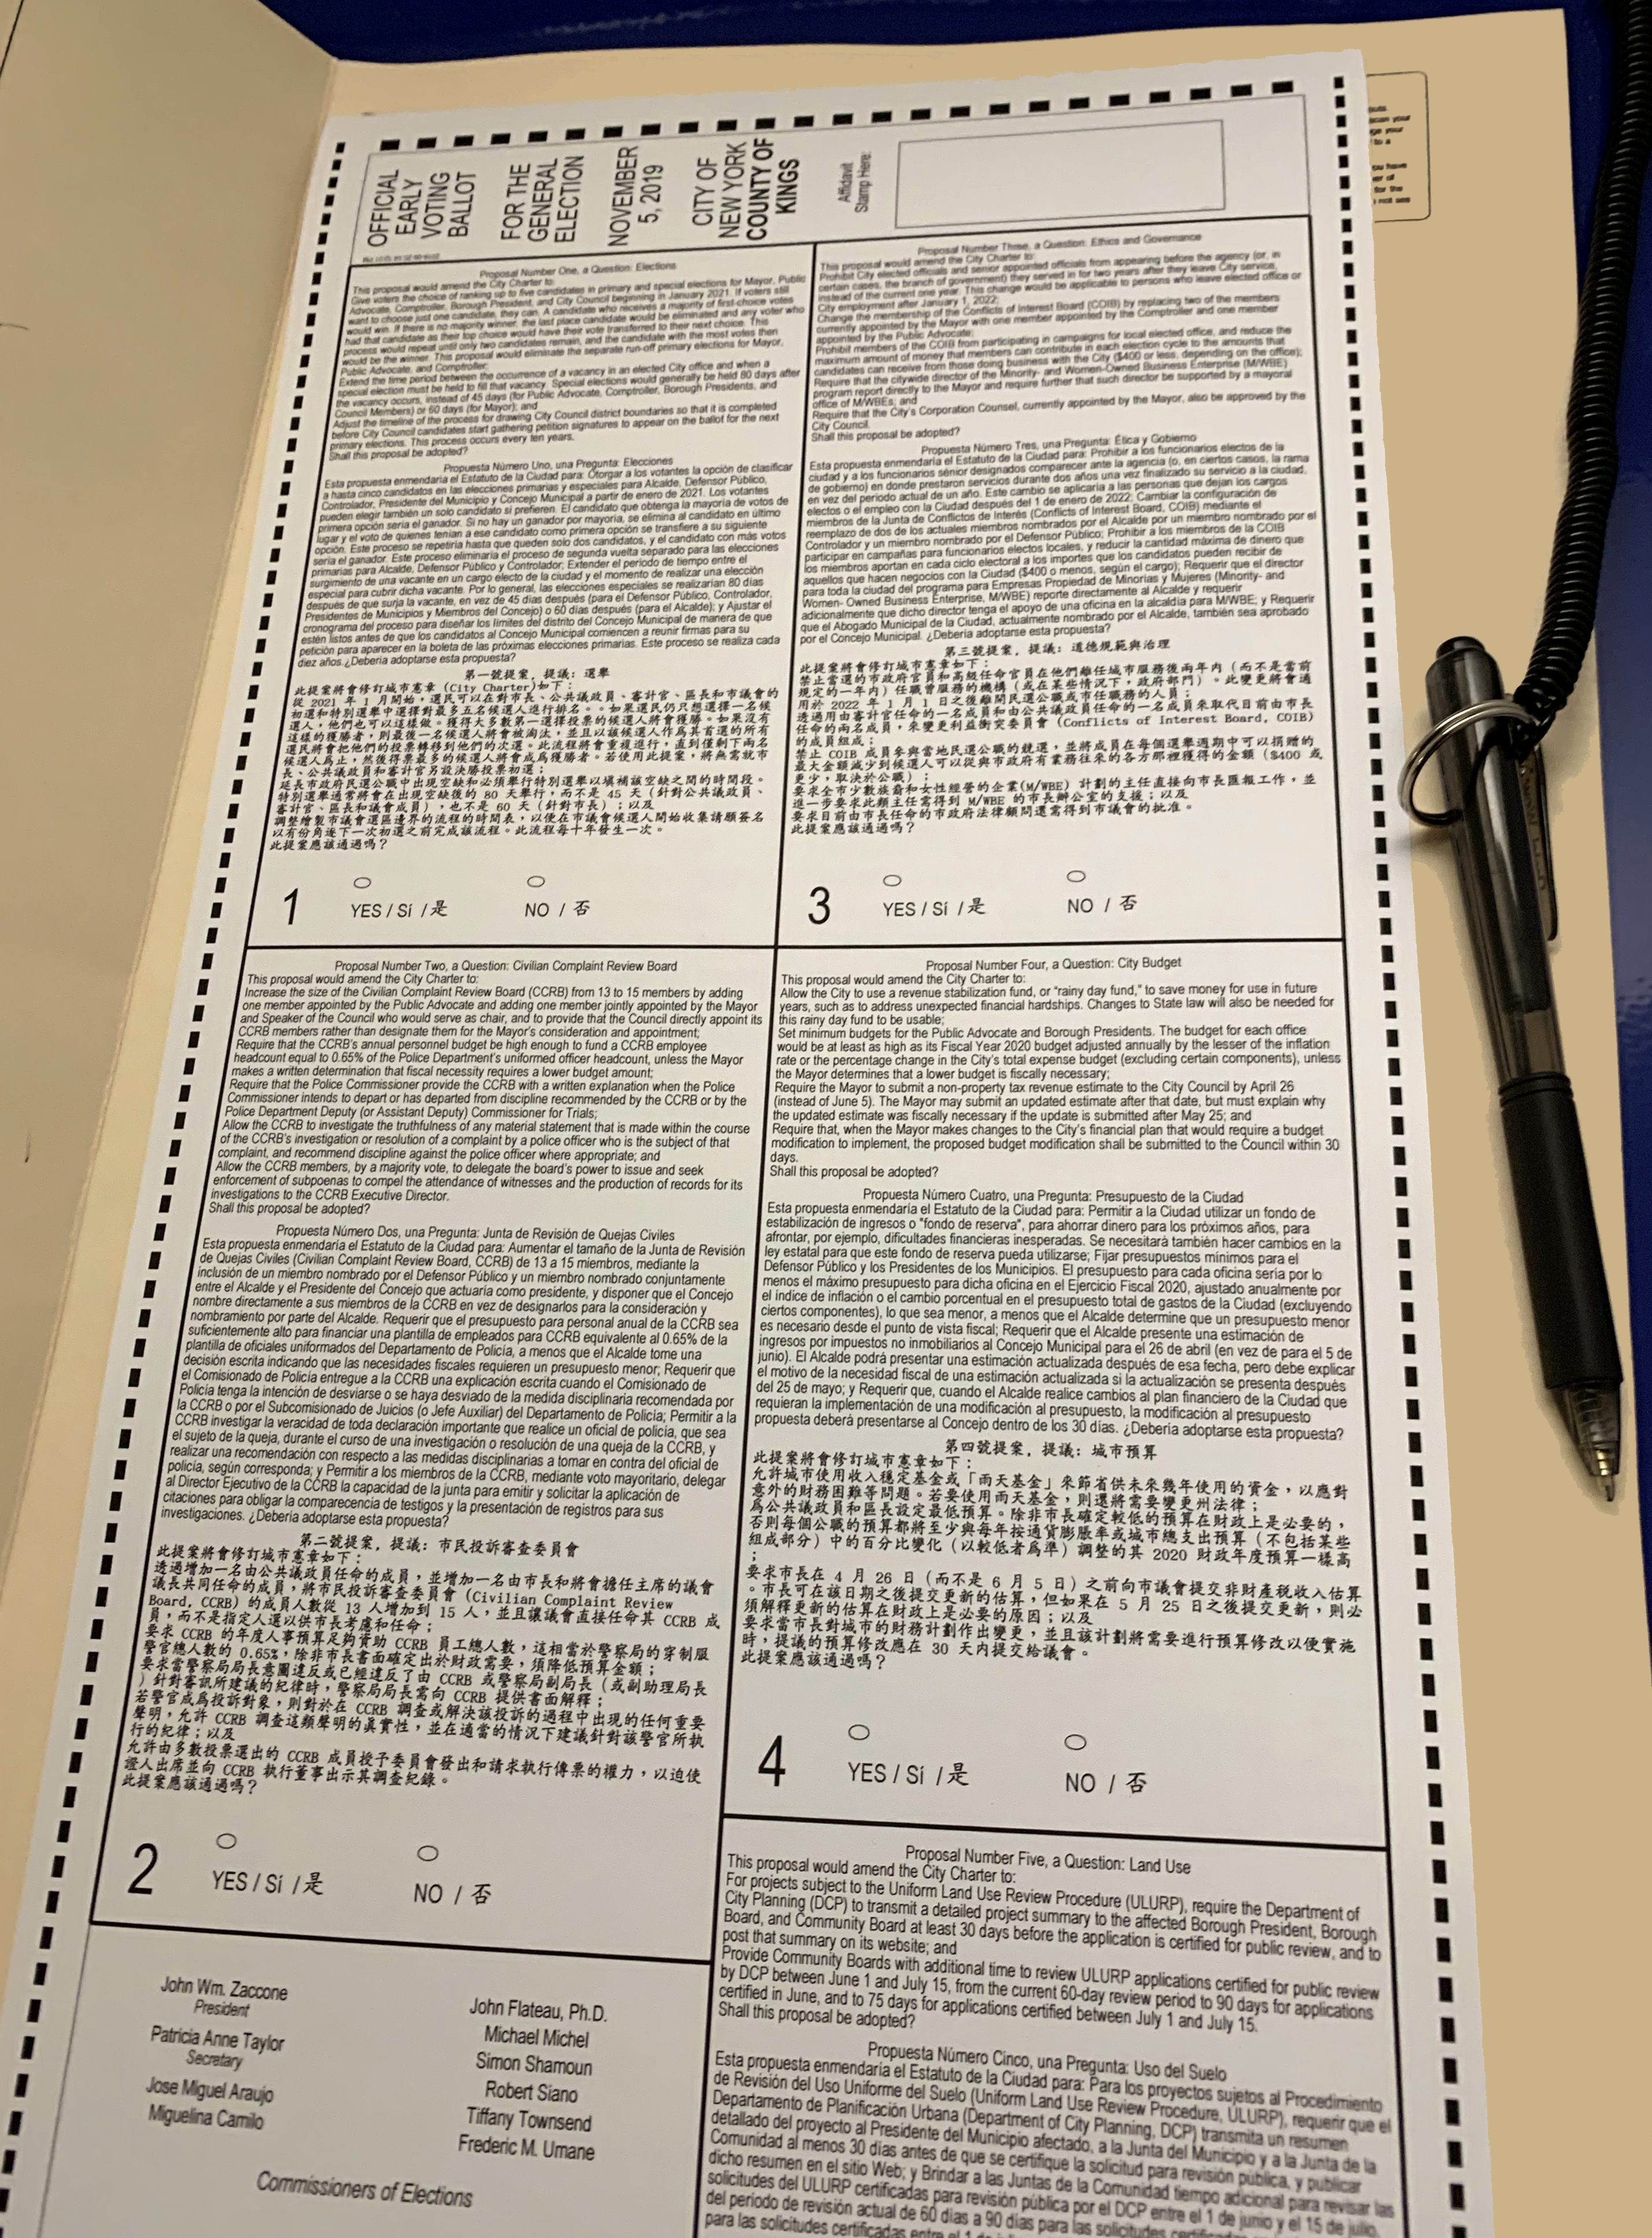 An election official advises that people read their voter guide before coming to fill out their ballot, especially because the City Charter proposals are in tiny print and hard to read. Eagle photo by Fay Storrm